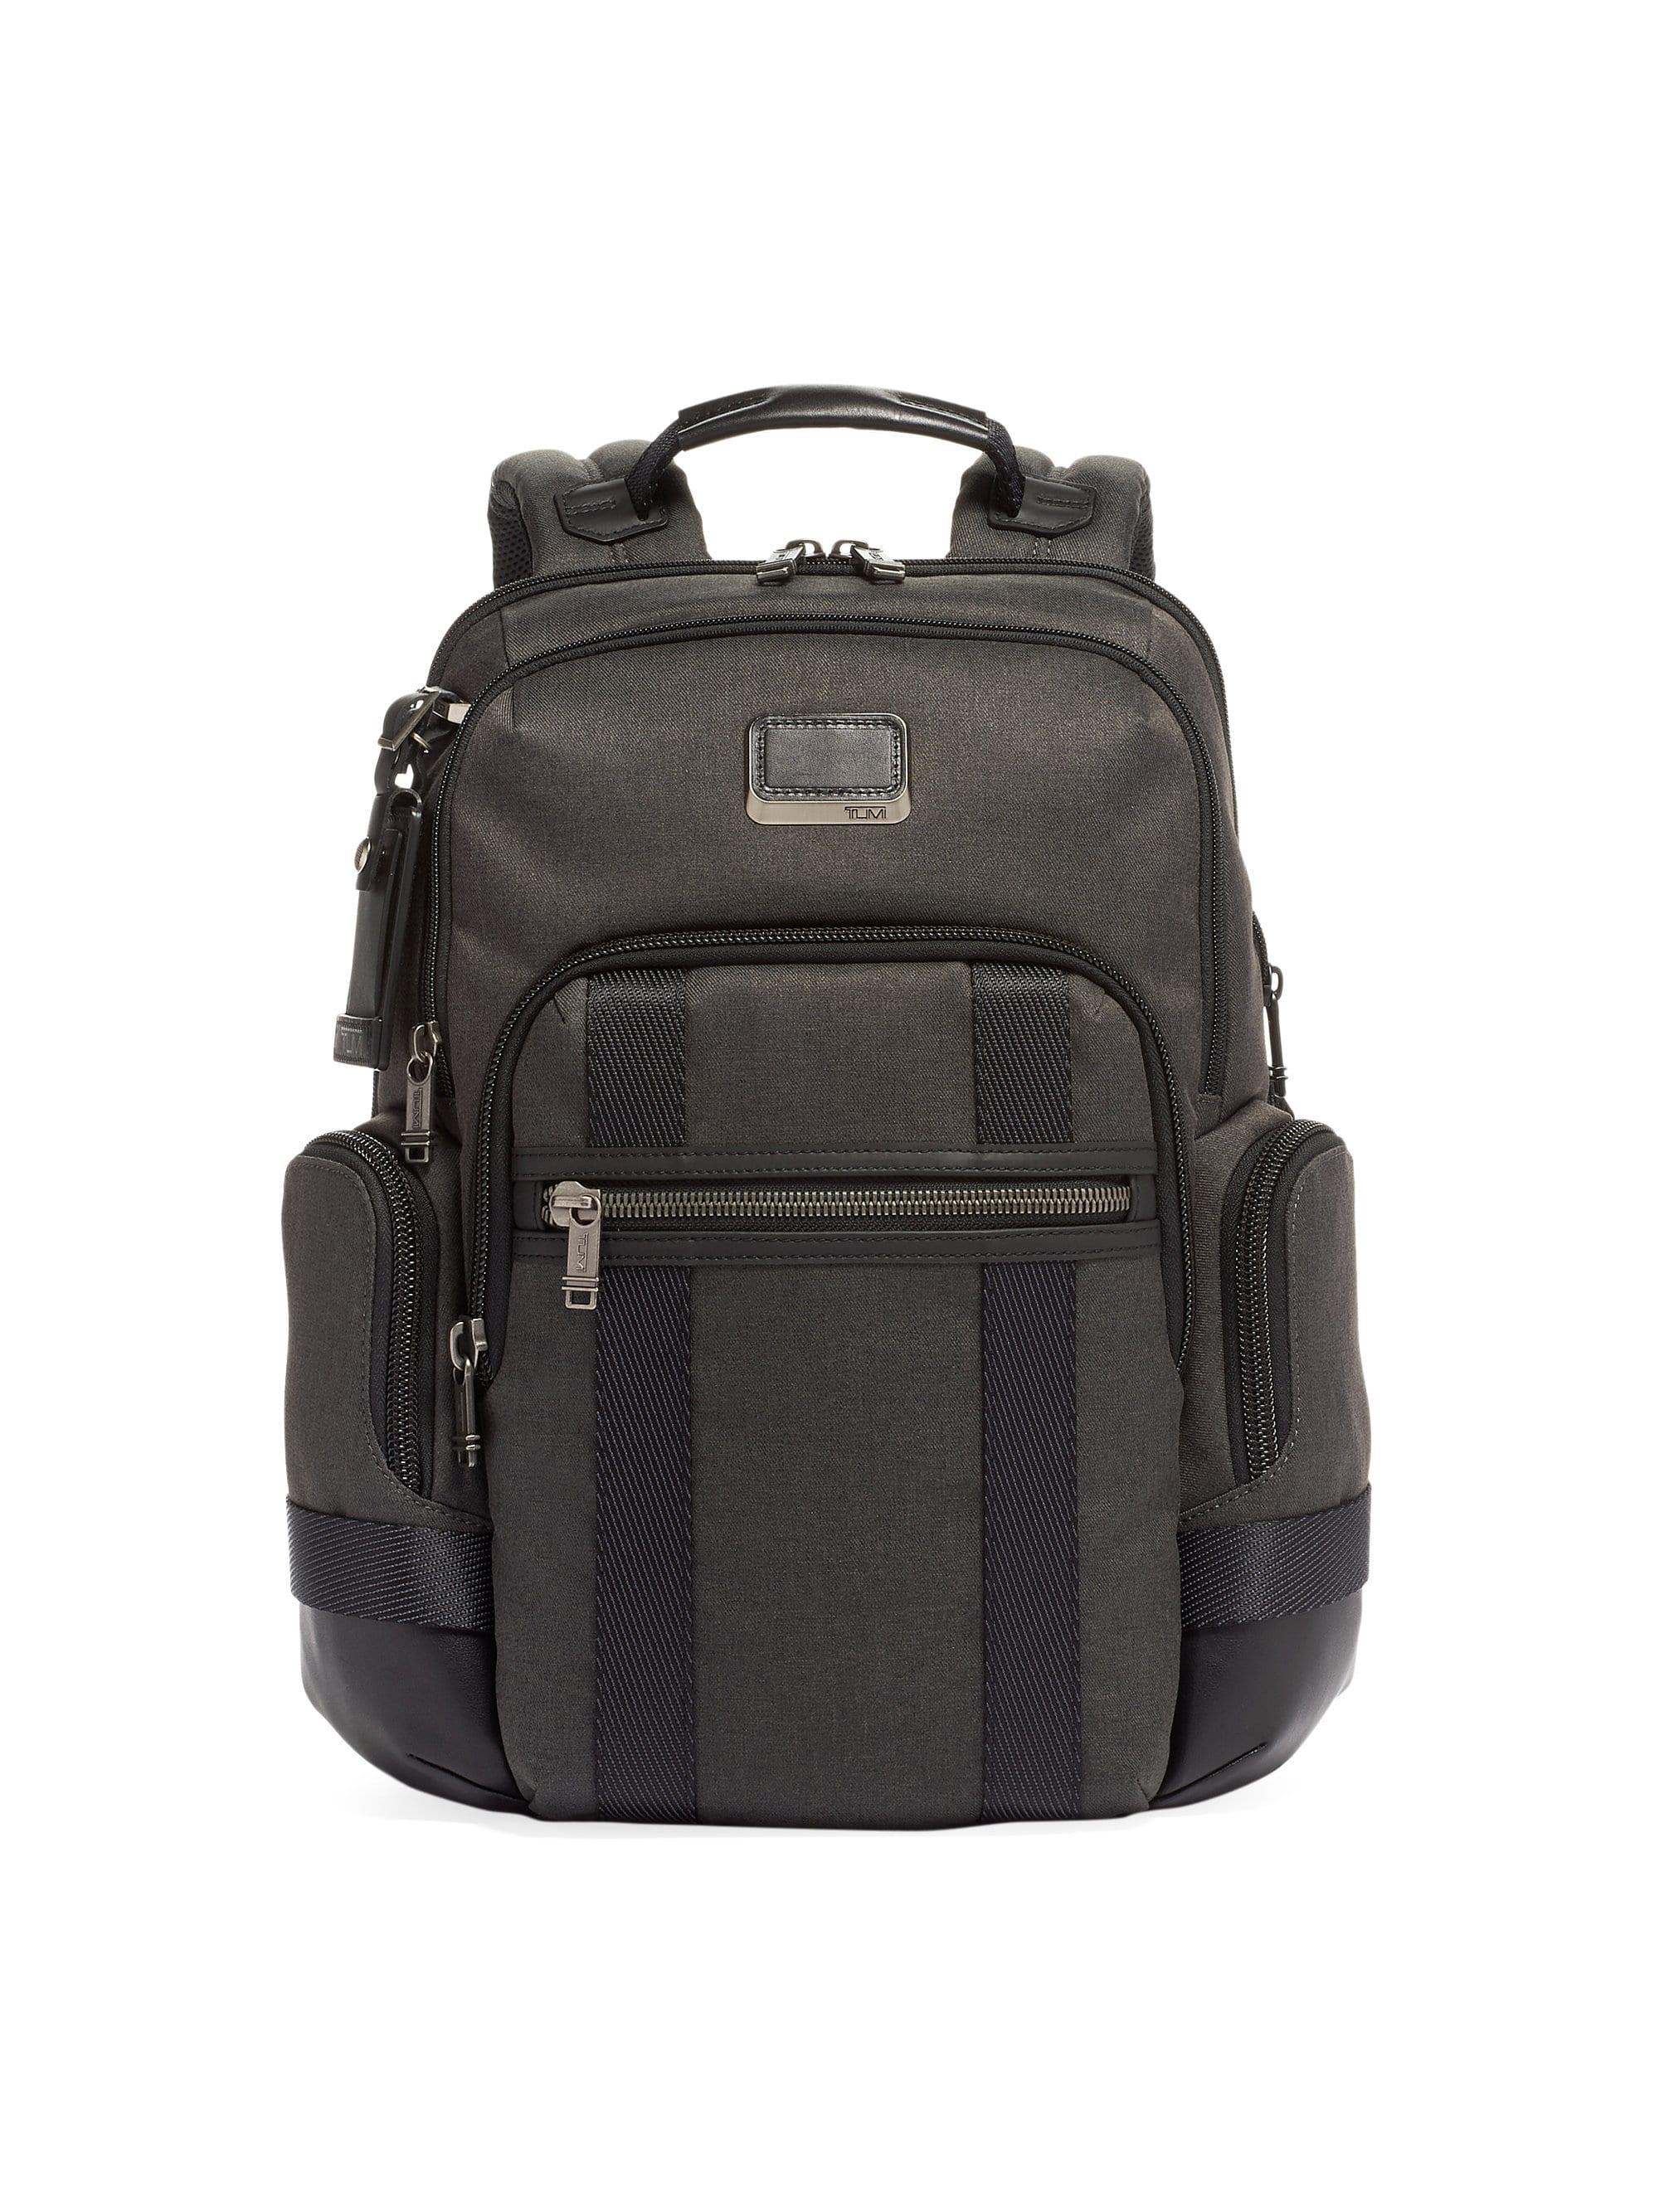 Tumi Alpha Bravo Nathan Expandable Backpack in Black - Lyst